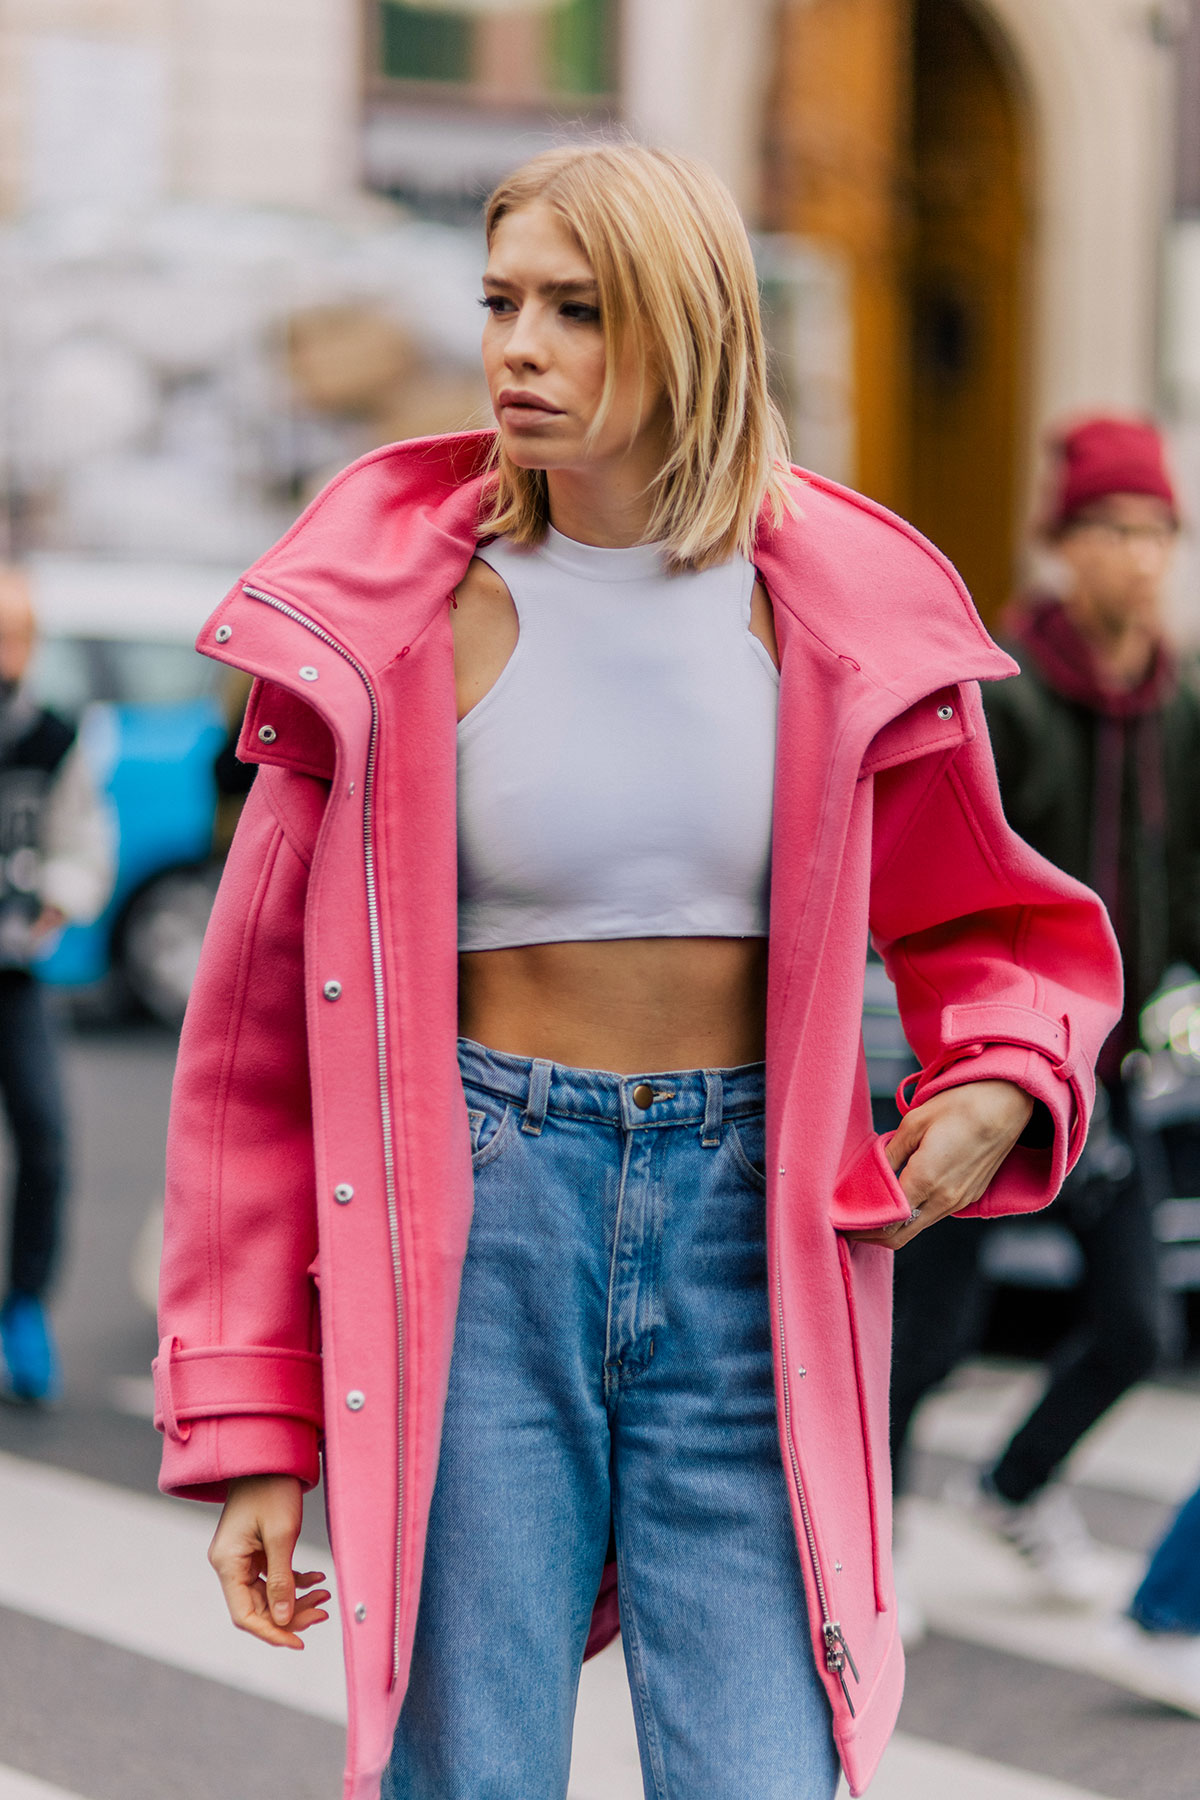 Elena Perminova wearing a pink Emilio Pucci coat, Versace cropped top and Dior shoes after the Stella McCartney Fall/Winter 2015-2016 fashion show in Paris, France